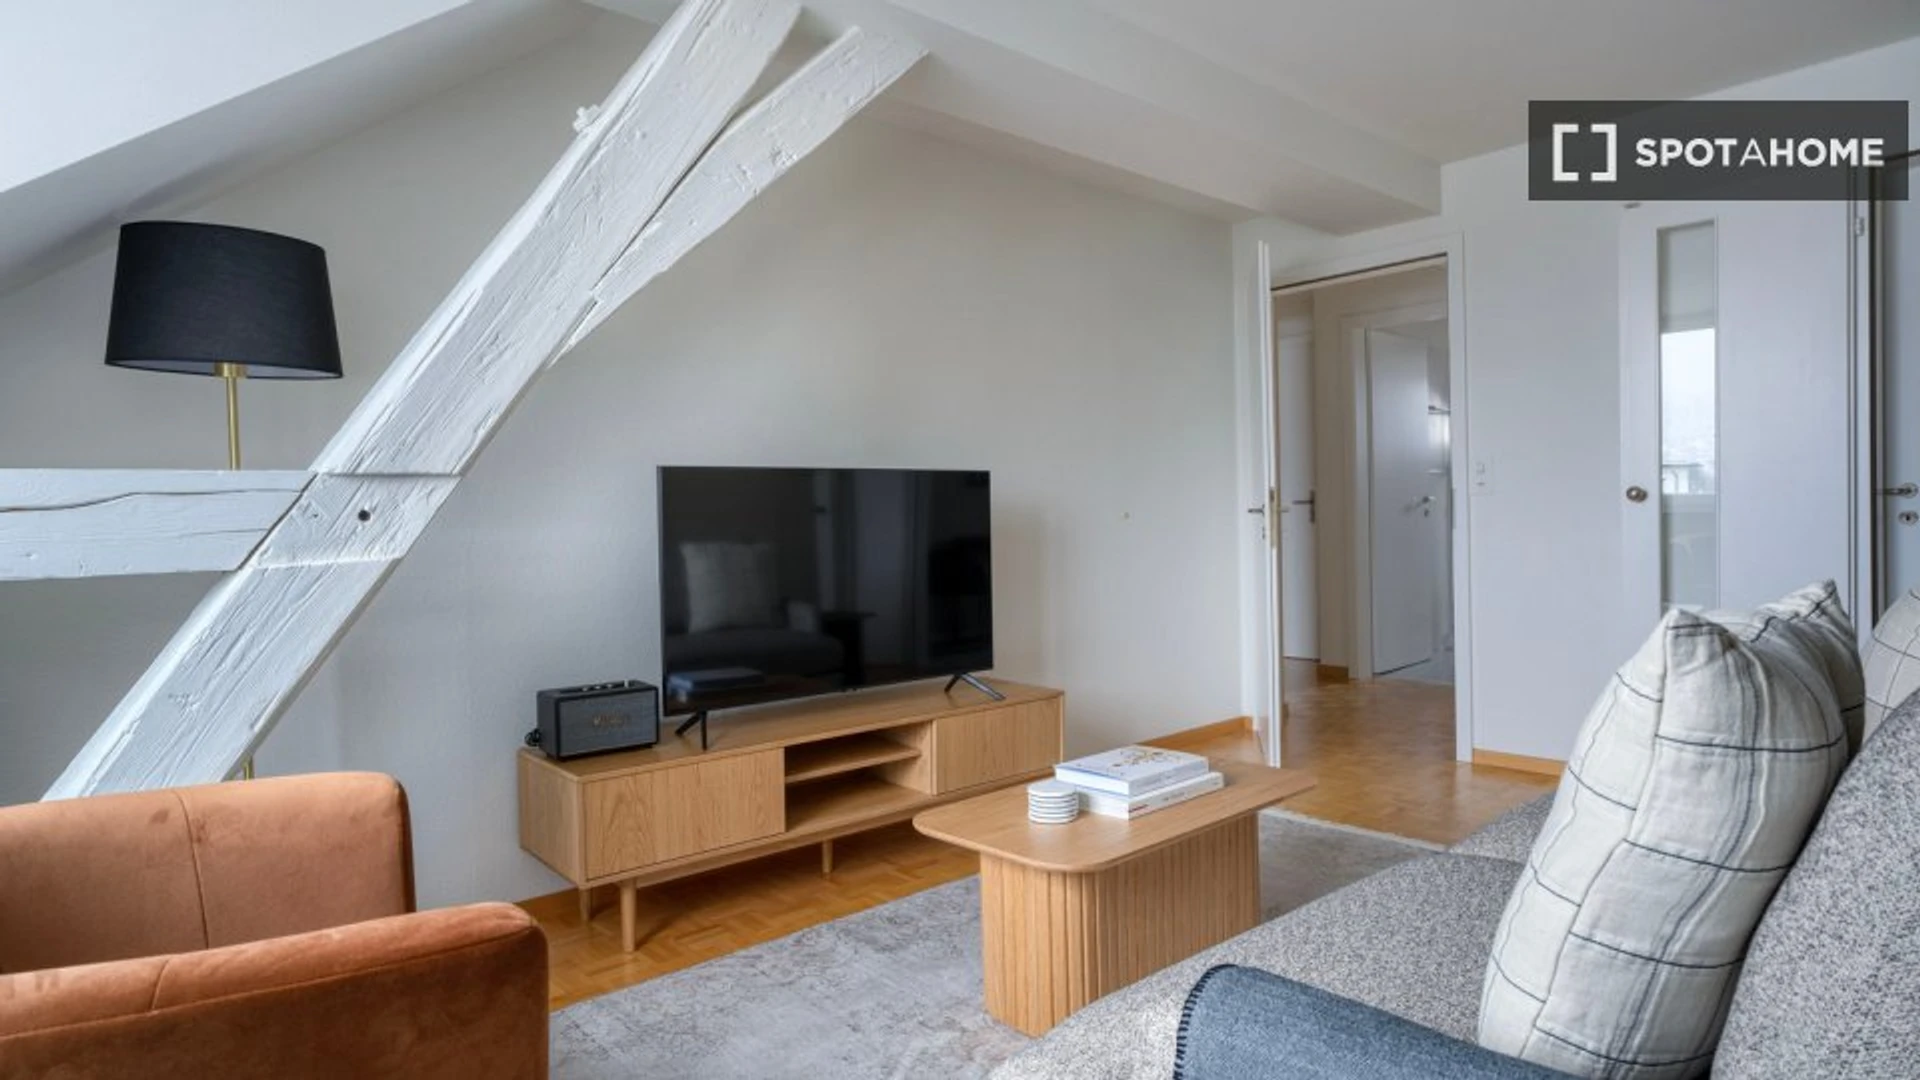 Two bedroom accommodation in Zurich